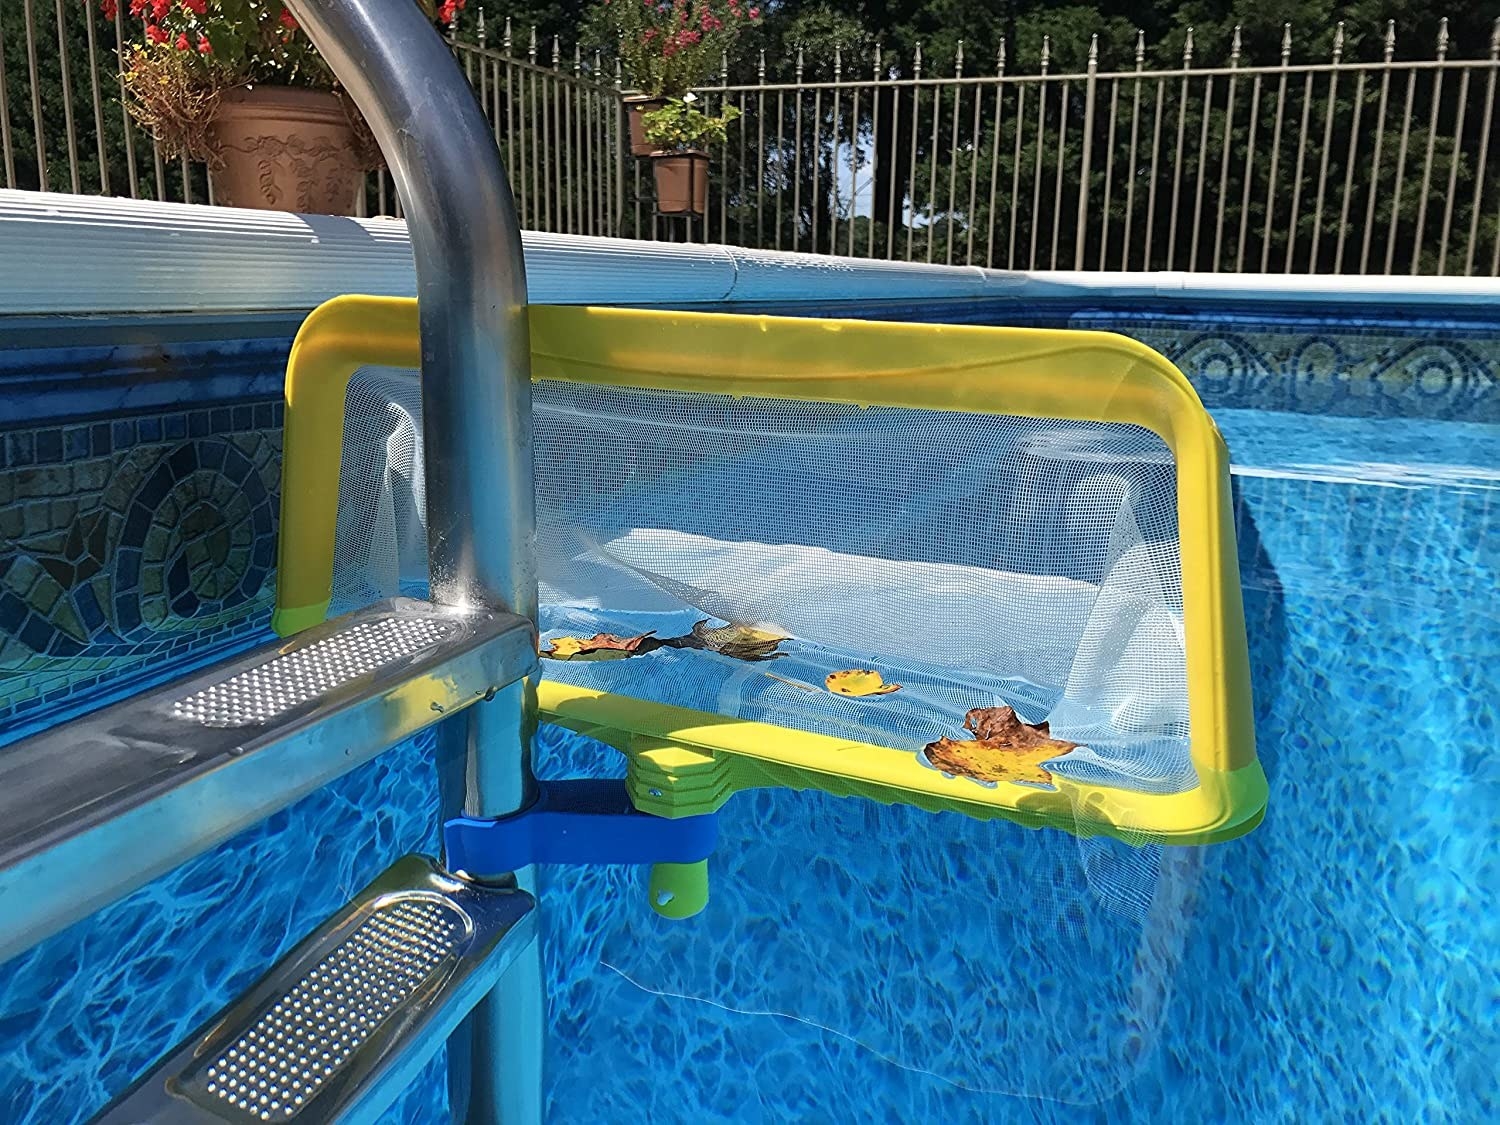 Net attached to a pool ladder using the clip-on tool 